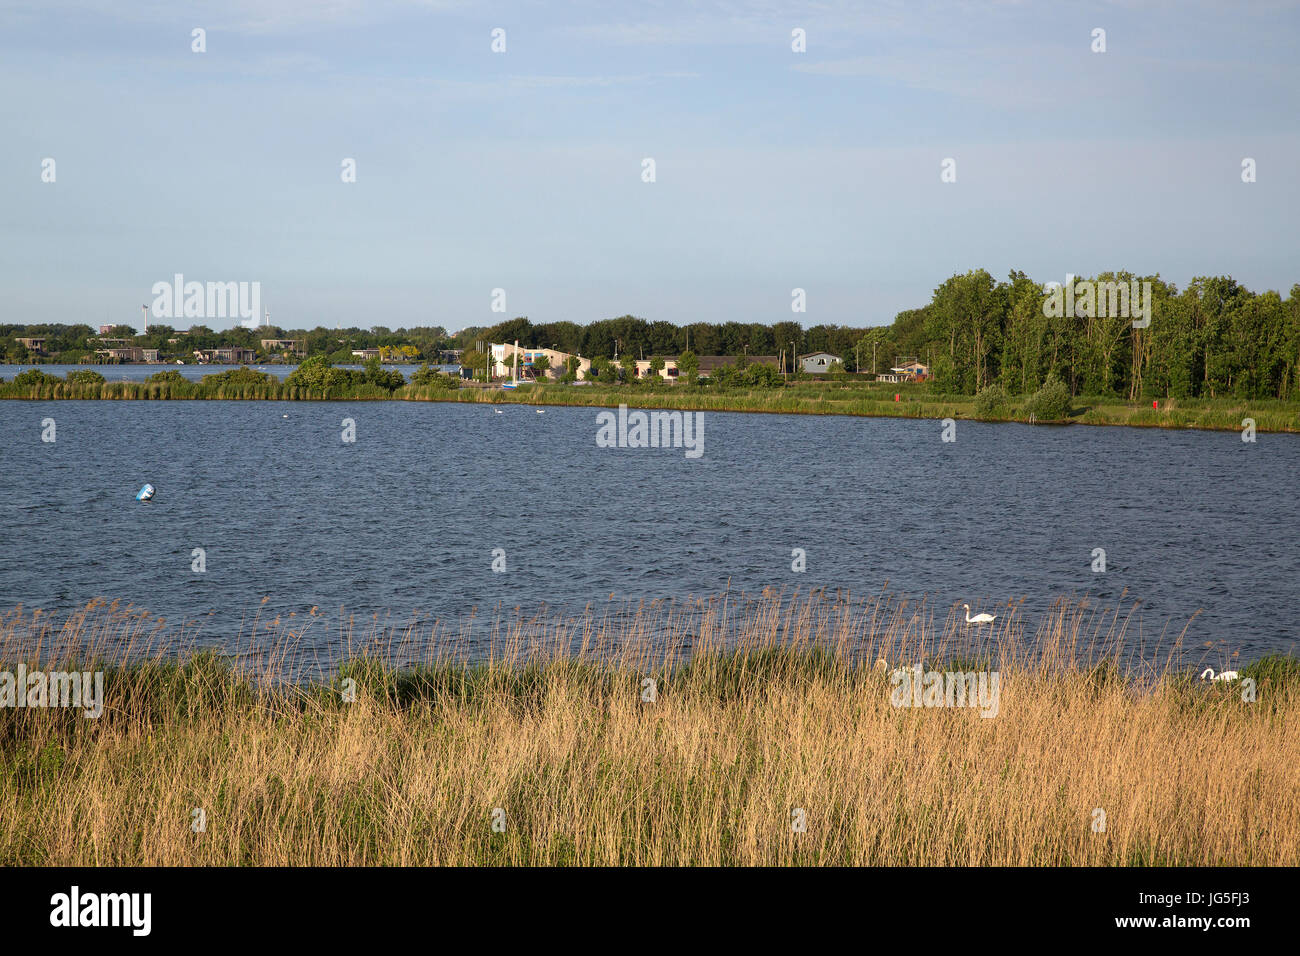 Watersports lake with a.o. harbor for sailing dinghies, Lelystad, Flevoland, Netherlands Stock Photo